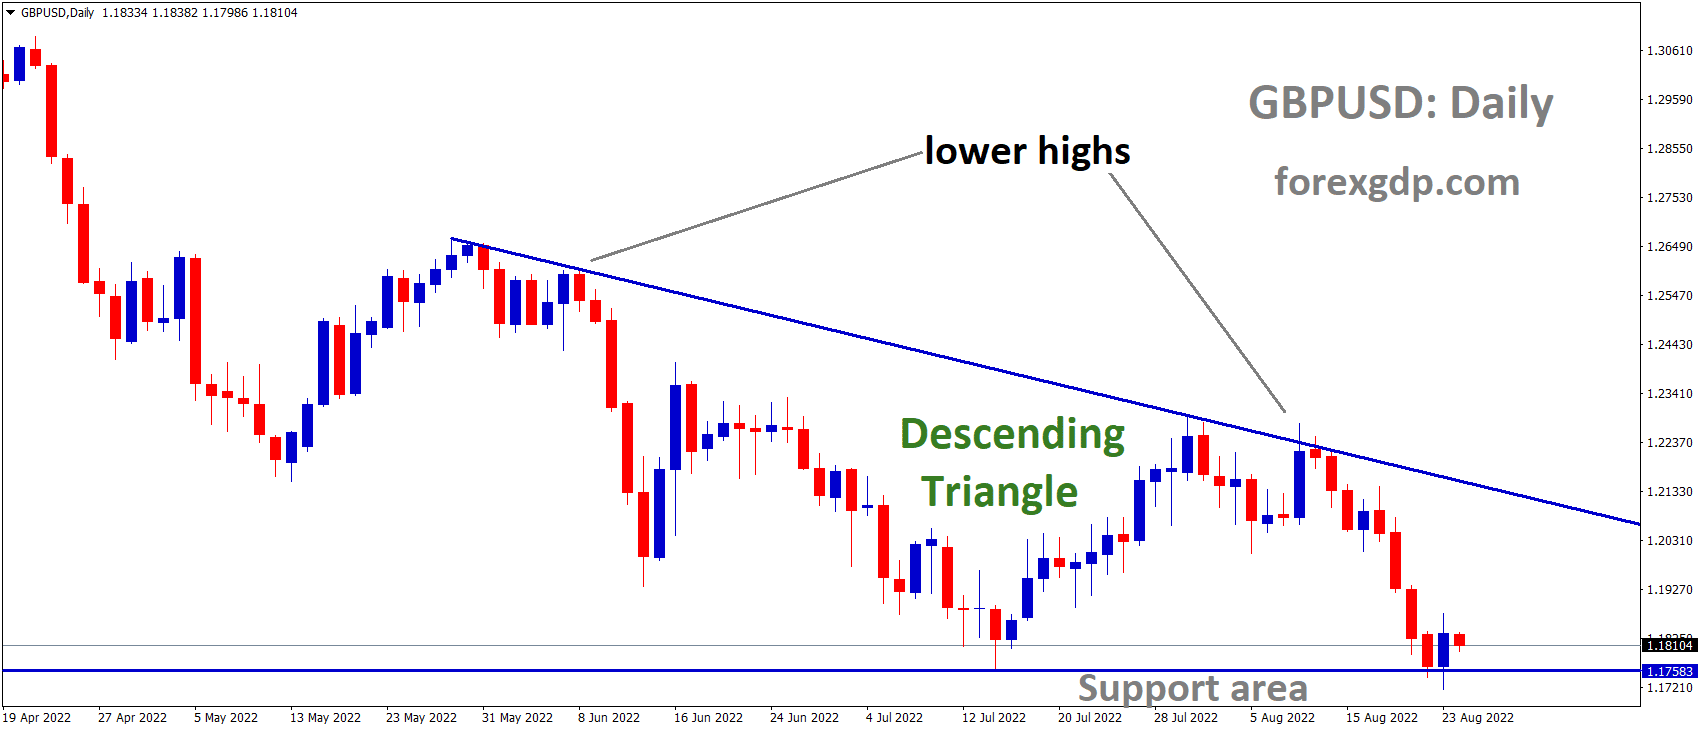 GBPUSD is moving in the Descending triangle pattern and the market has rebounded from the horizontal support area of the pattern